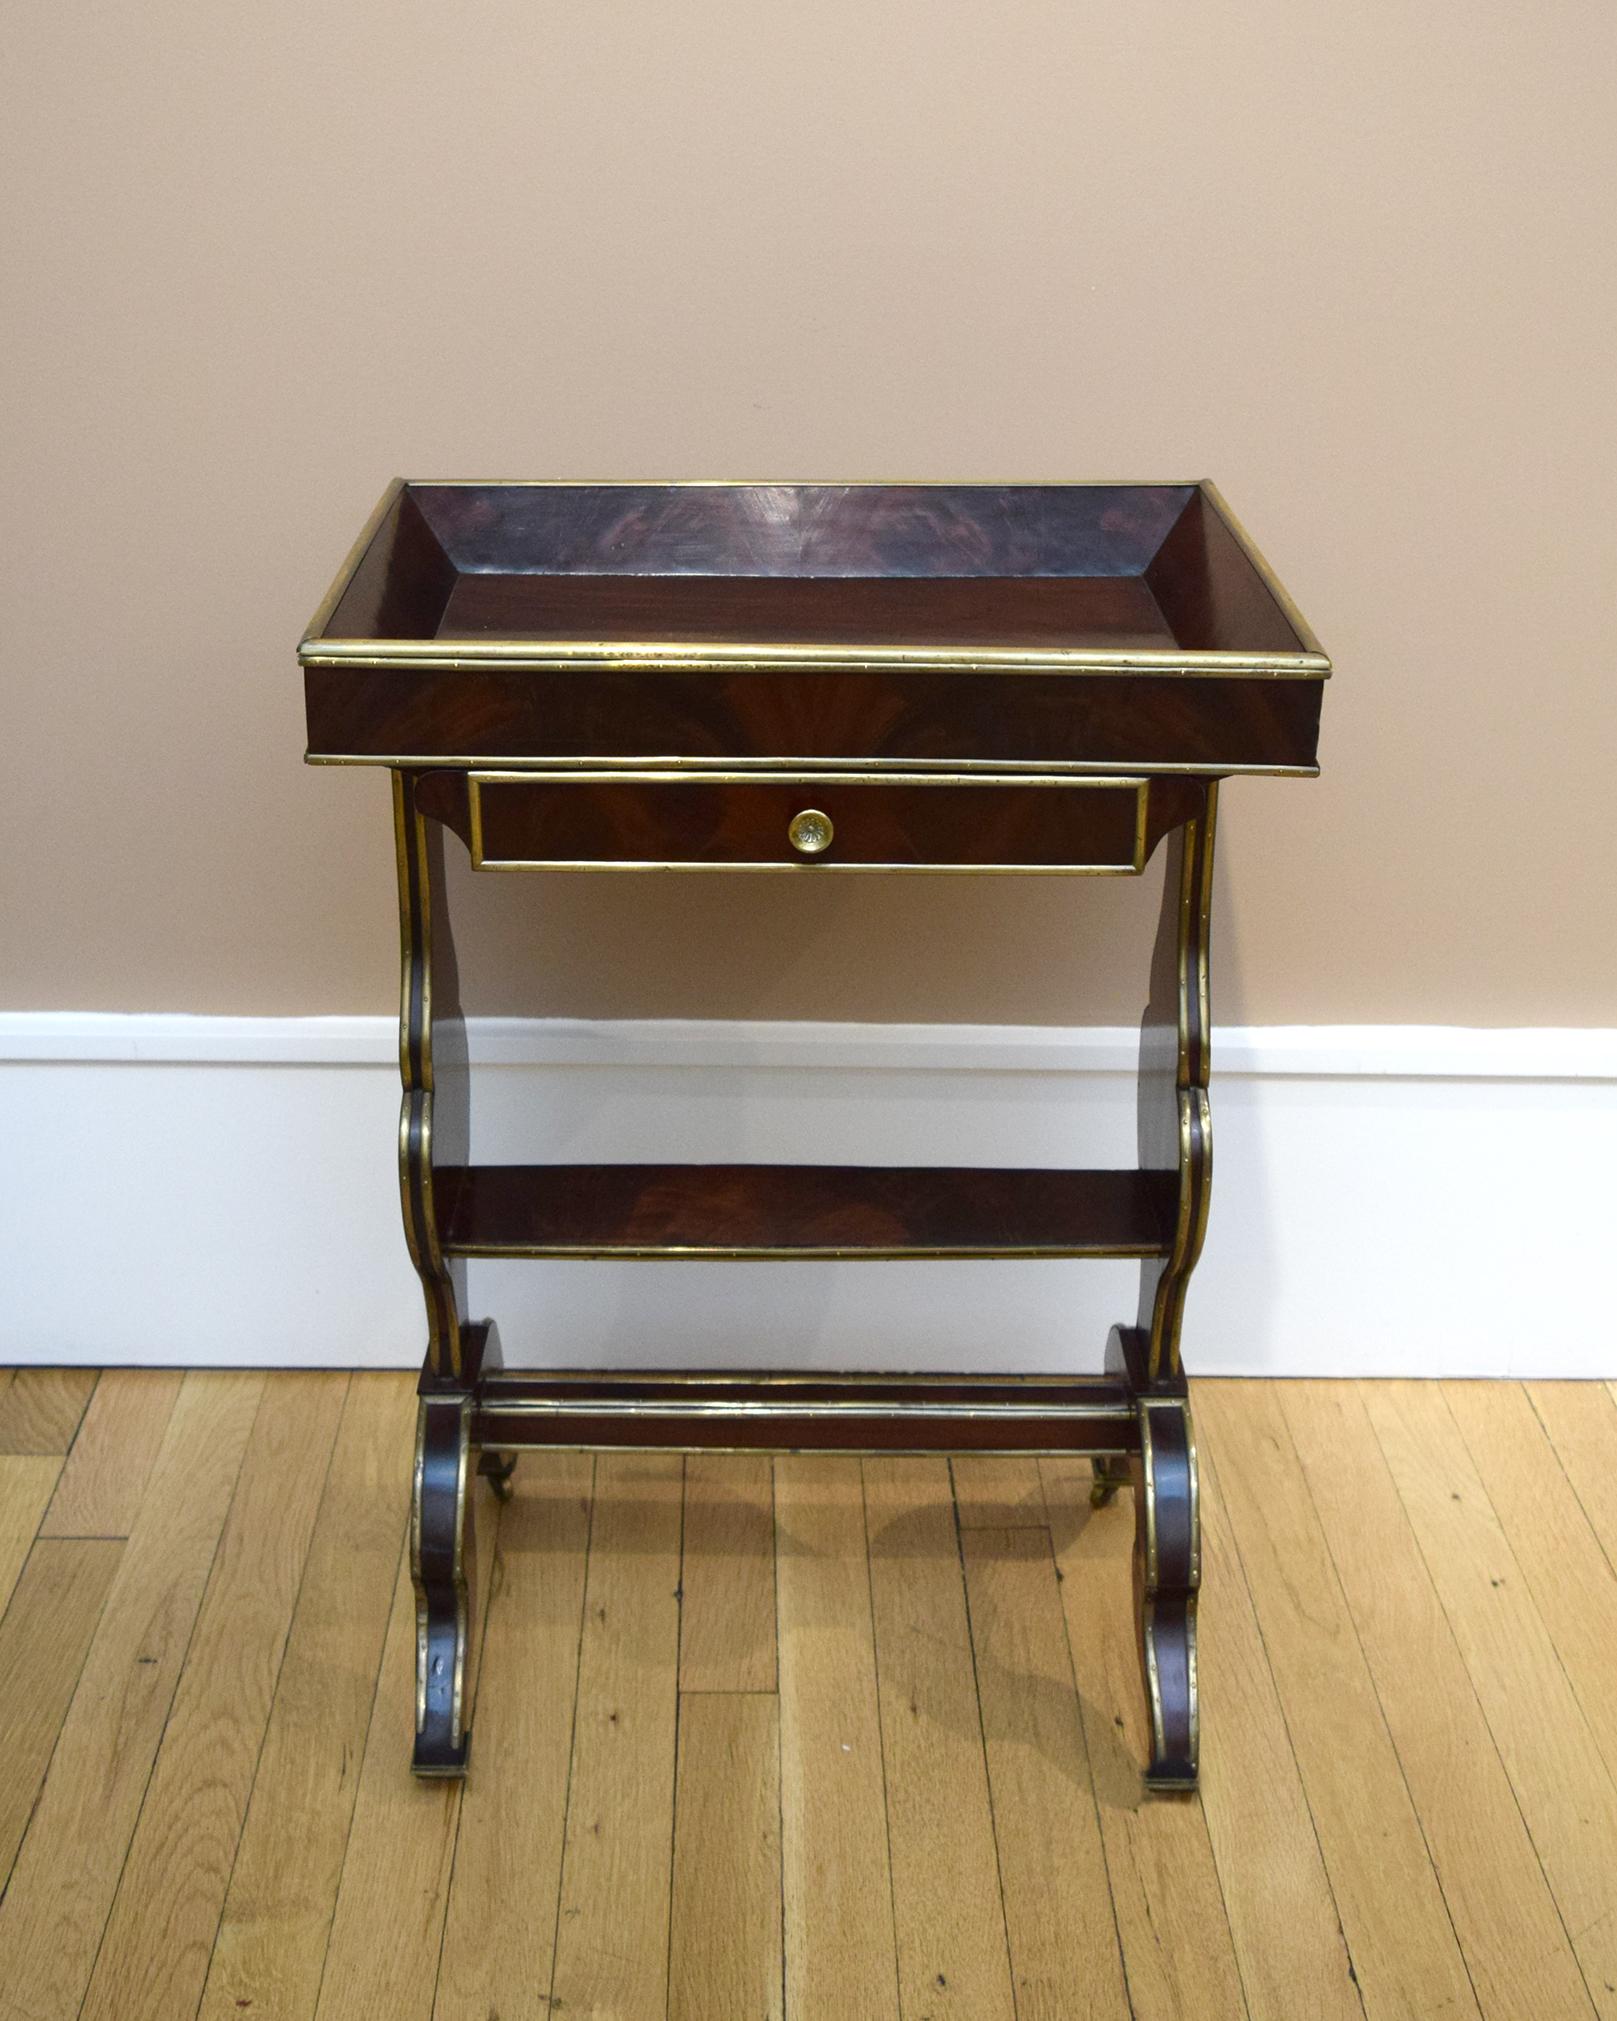 Every contour and plane of this exquisite tray-top, mahogany table on wheels is outlined with glinting brass stringing — a hallmark of Russian cabinetry in the late 18th and early 19th centuries. The form, however, is derived from the furniture then